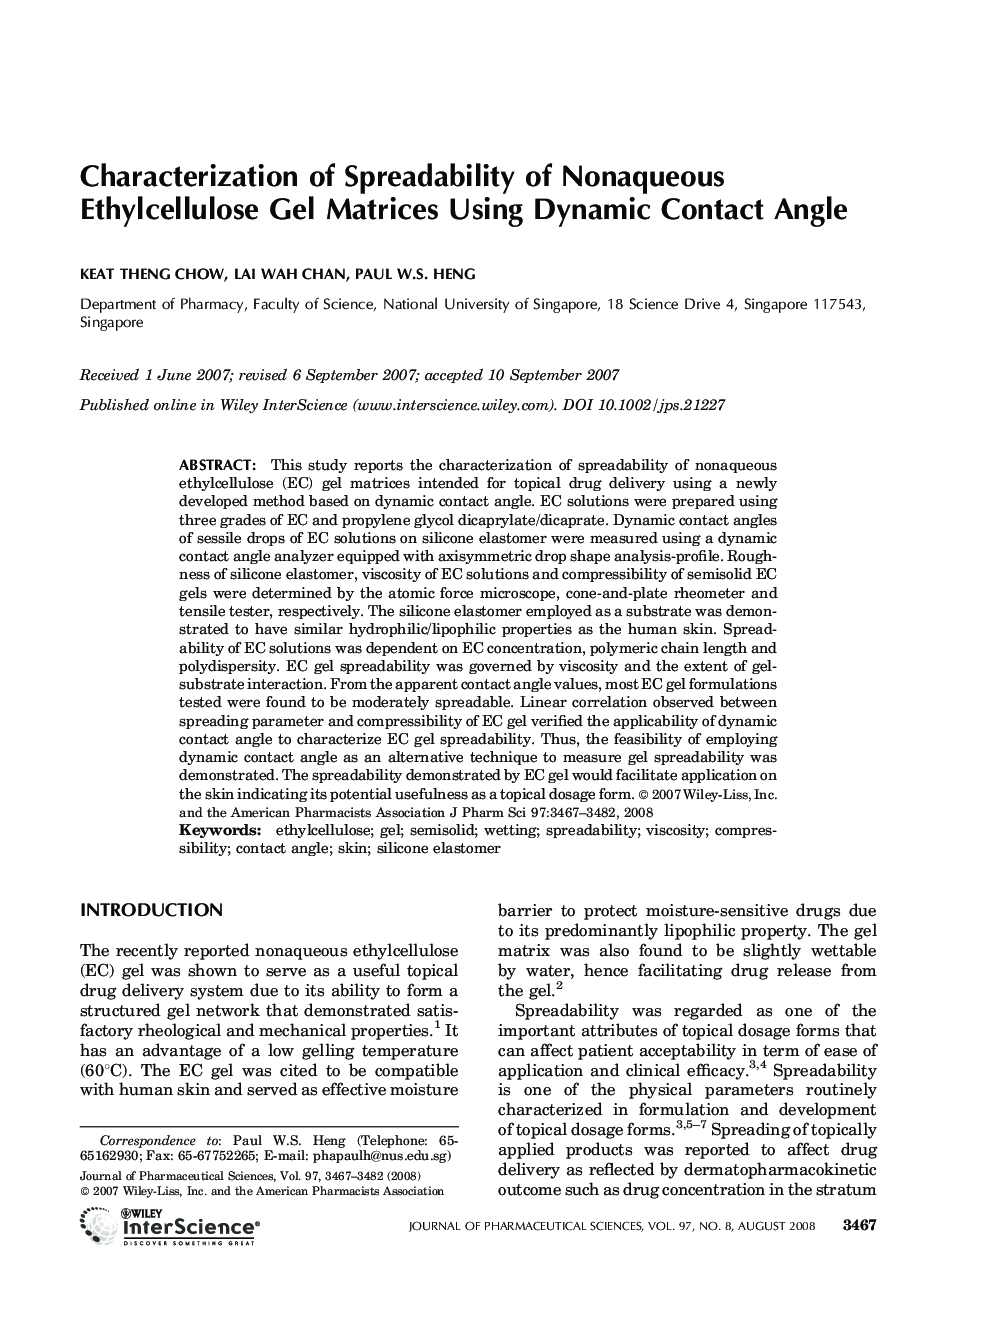 Characterization of Spreadability of Nonaqueous Ethylcellulose Gel Matrices Using Dynamic Contact Angle